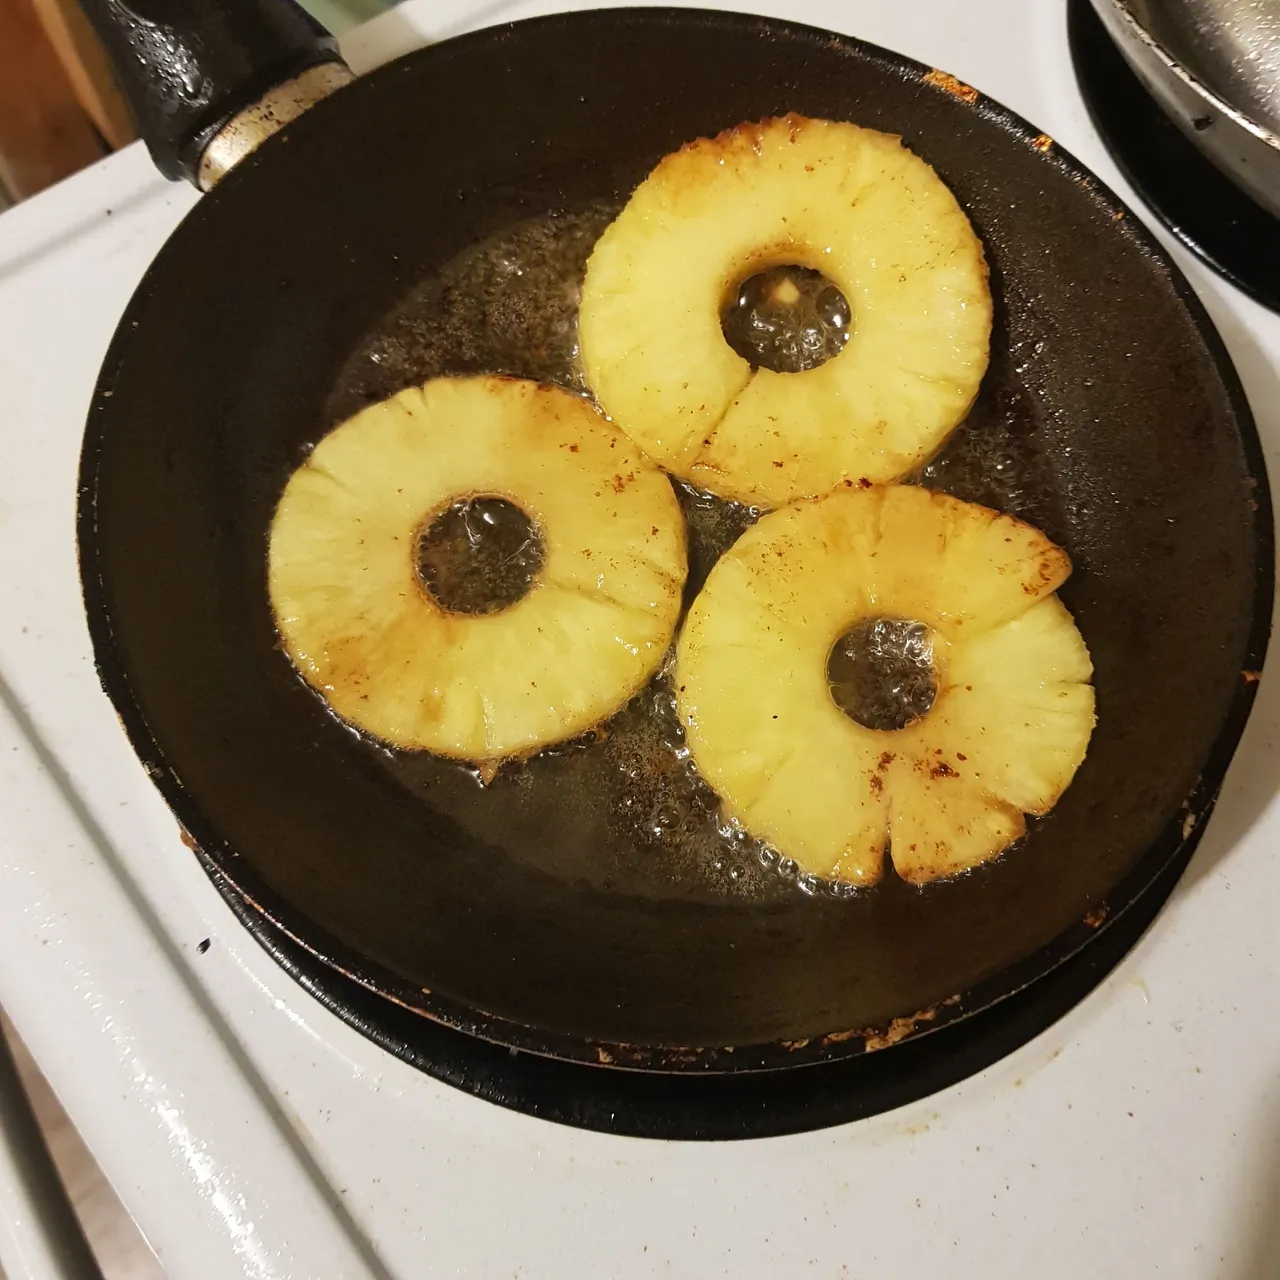 *Frying the pineapple*